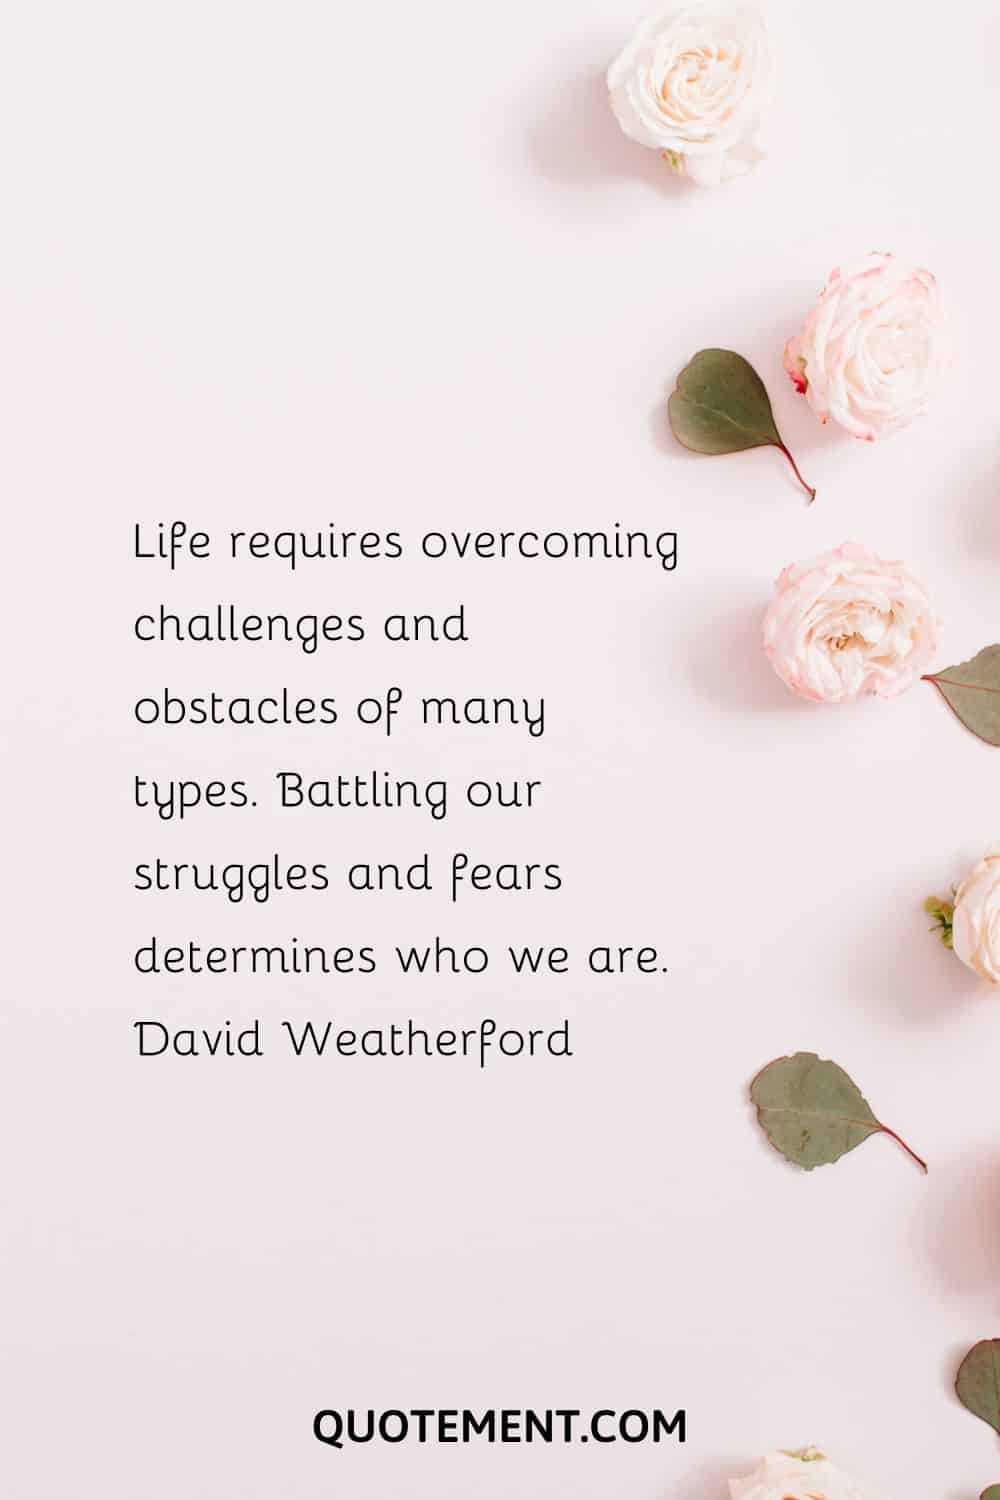 Life requires overcoming challenges and obstacles of many types